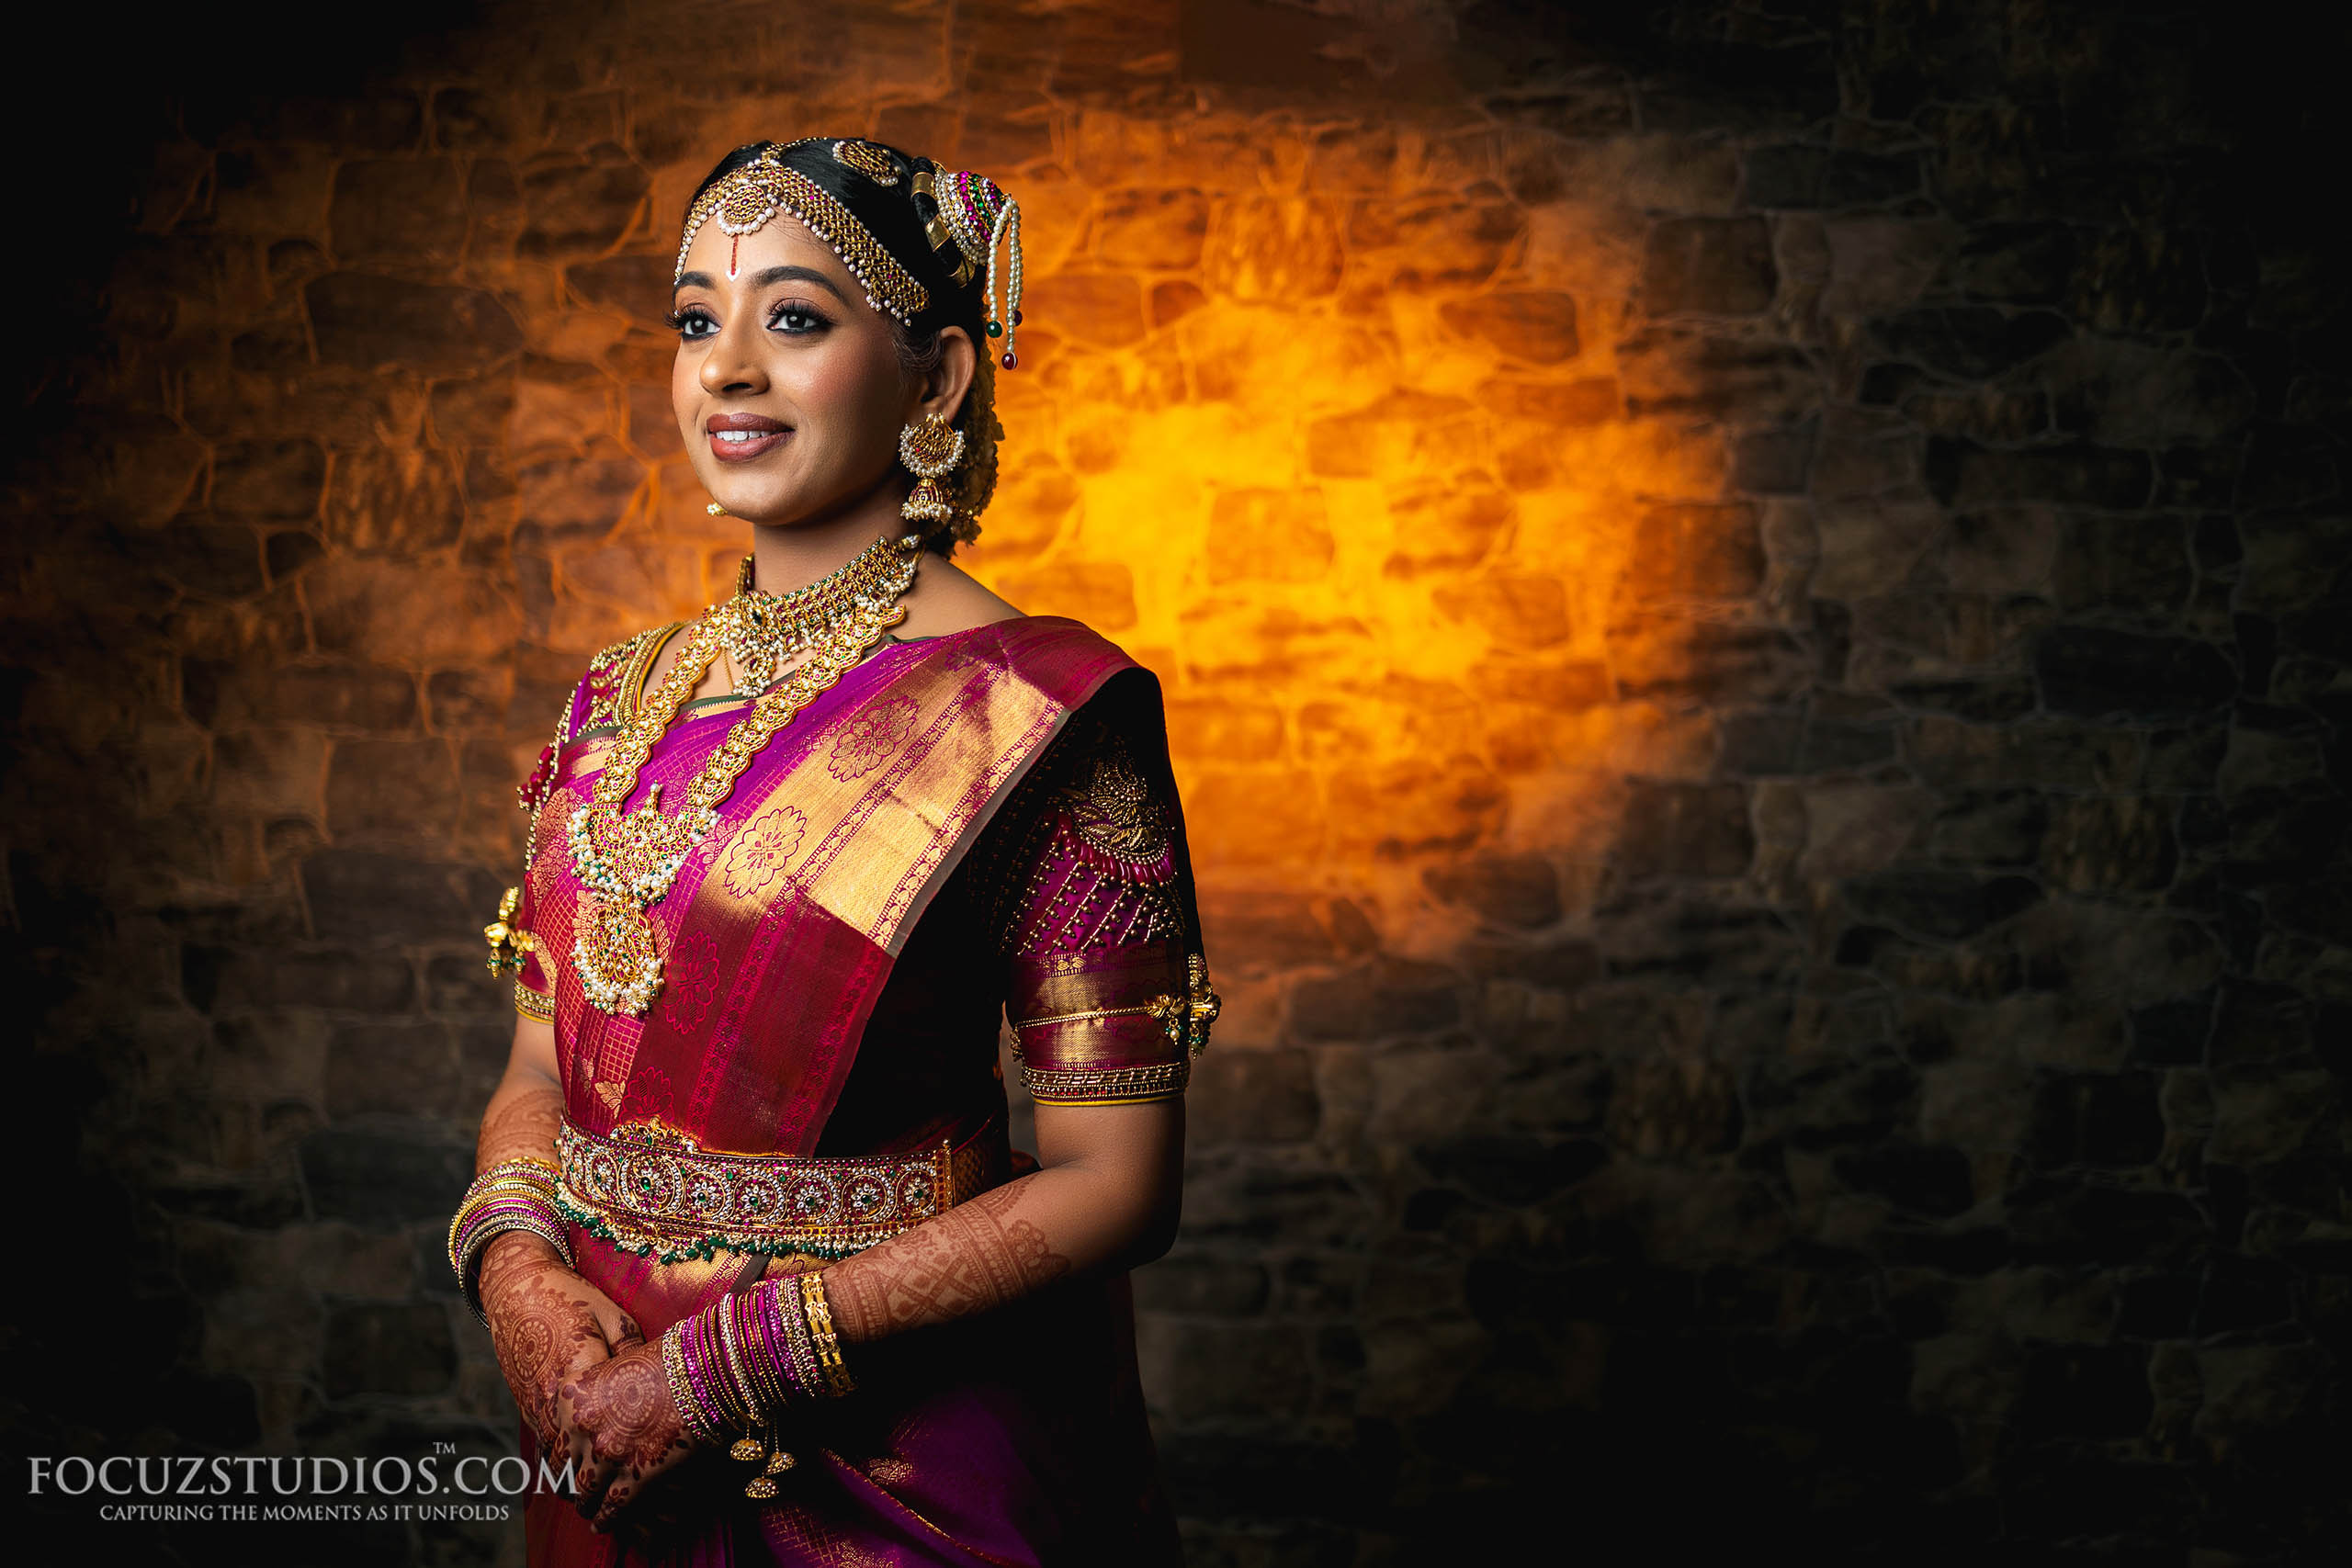 South Indian bride poses stock photo. Image of dress - 113417792